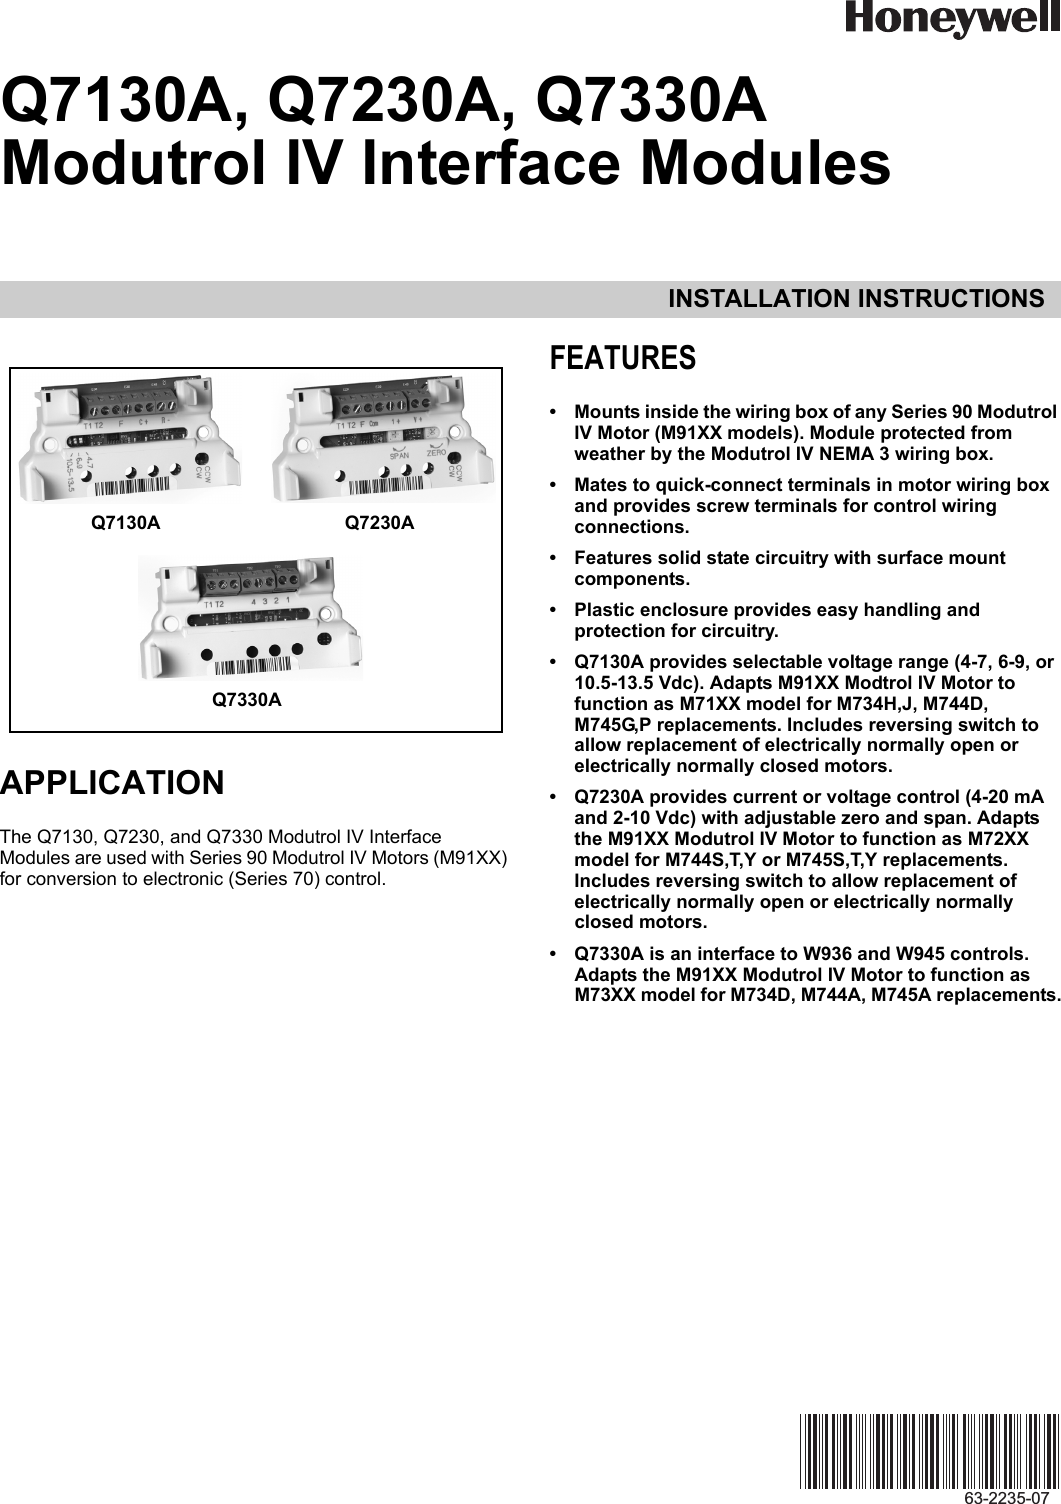 Page 1 of 8 - 63-2235_D Q7130A, Q7230A, Q7330AModutrol IV Interface Modules  Installation Directions